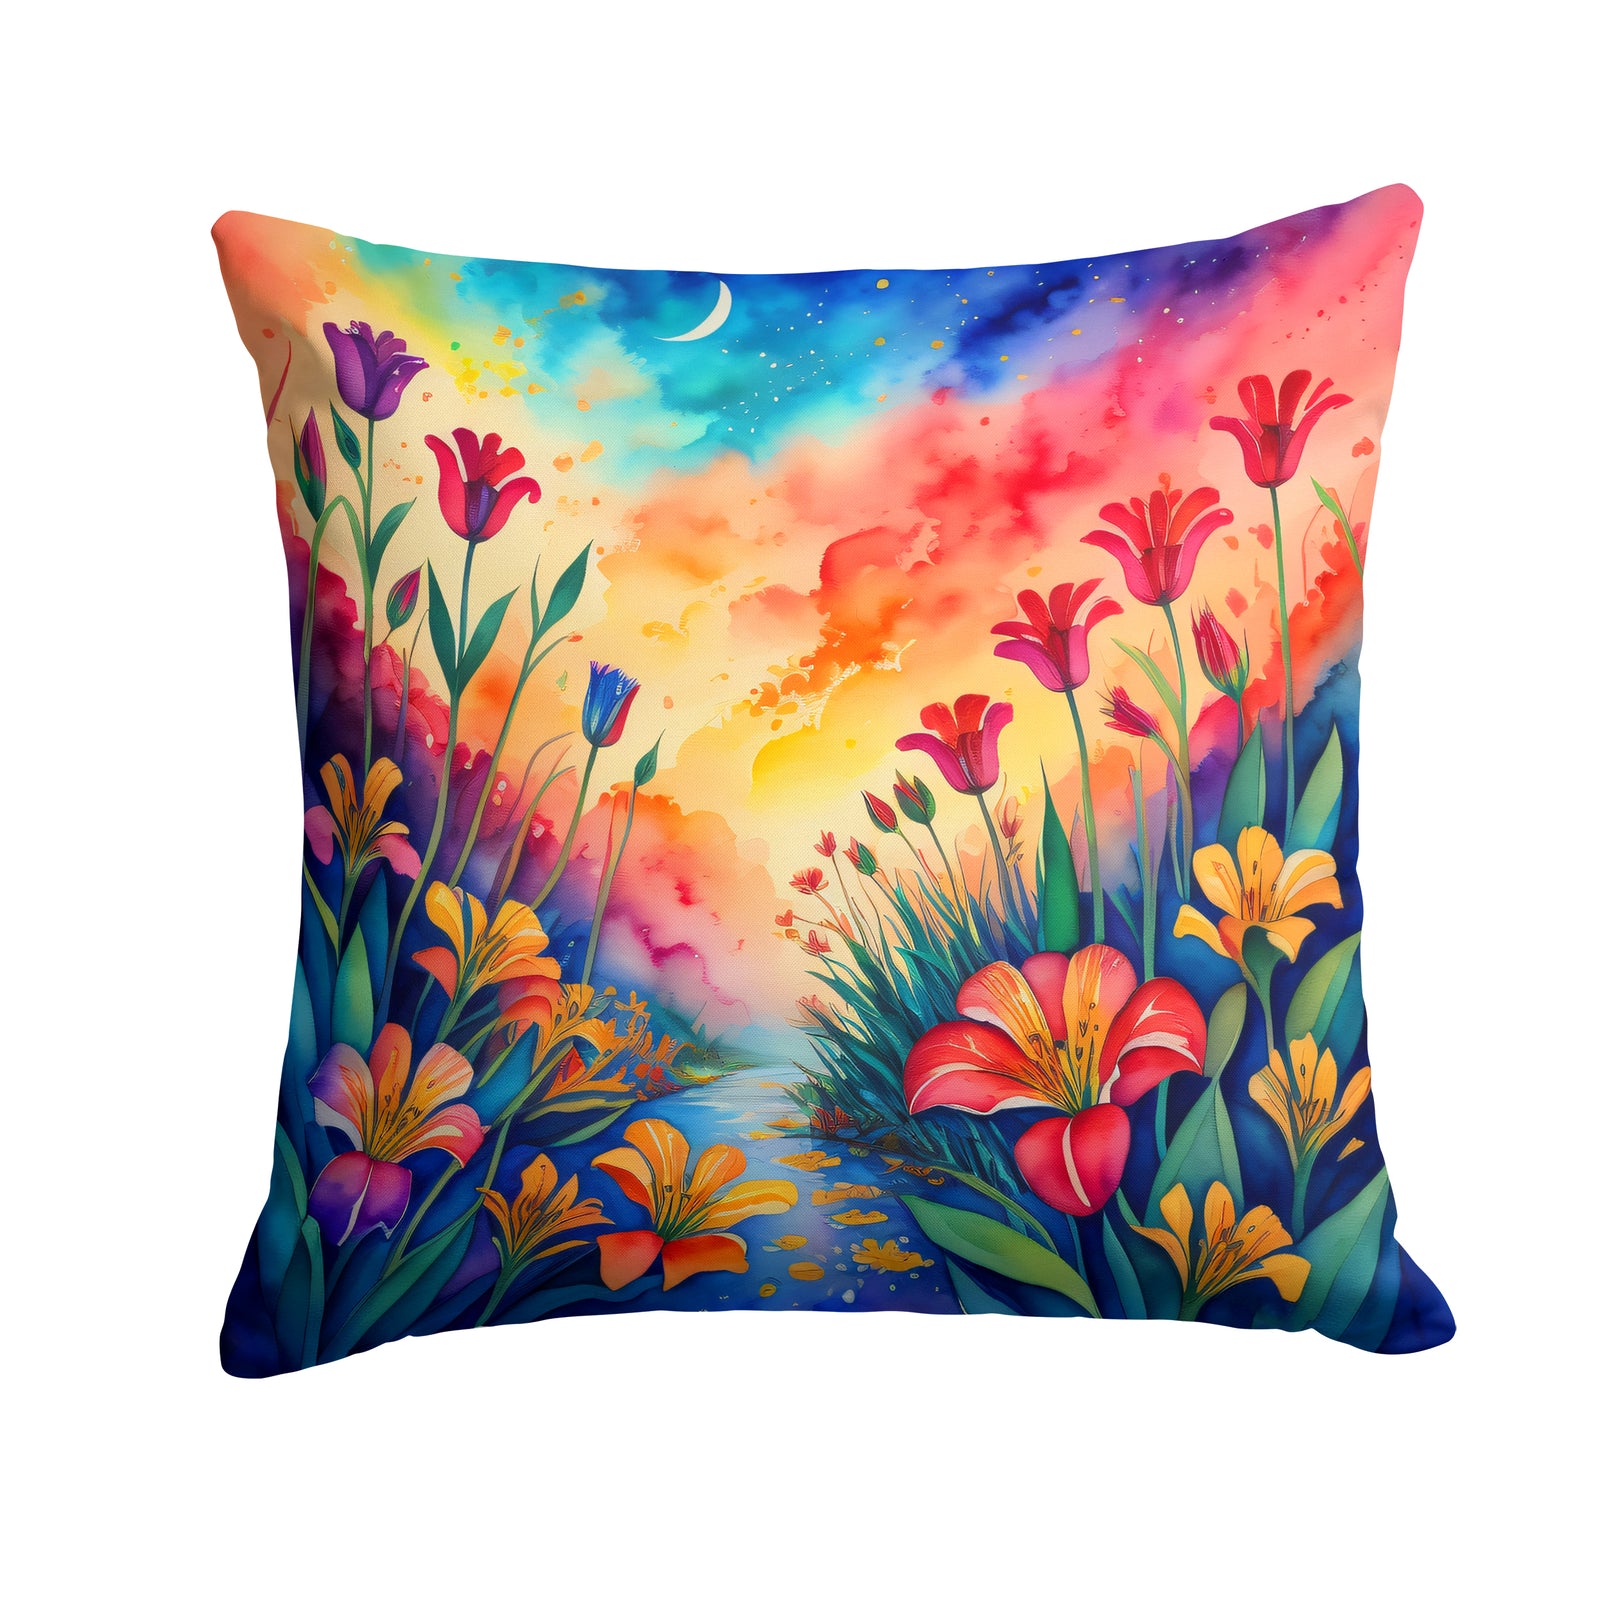 Buy this Colorful Alstroemerias Fabric Decorative Pillow